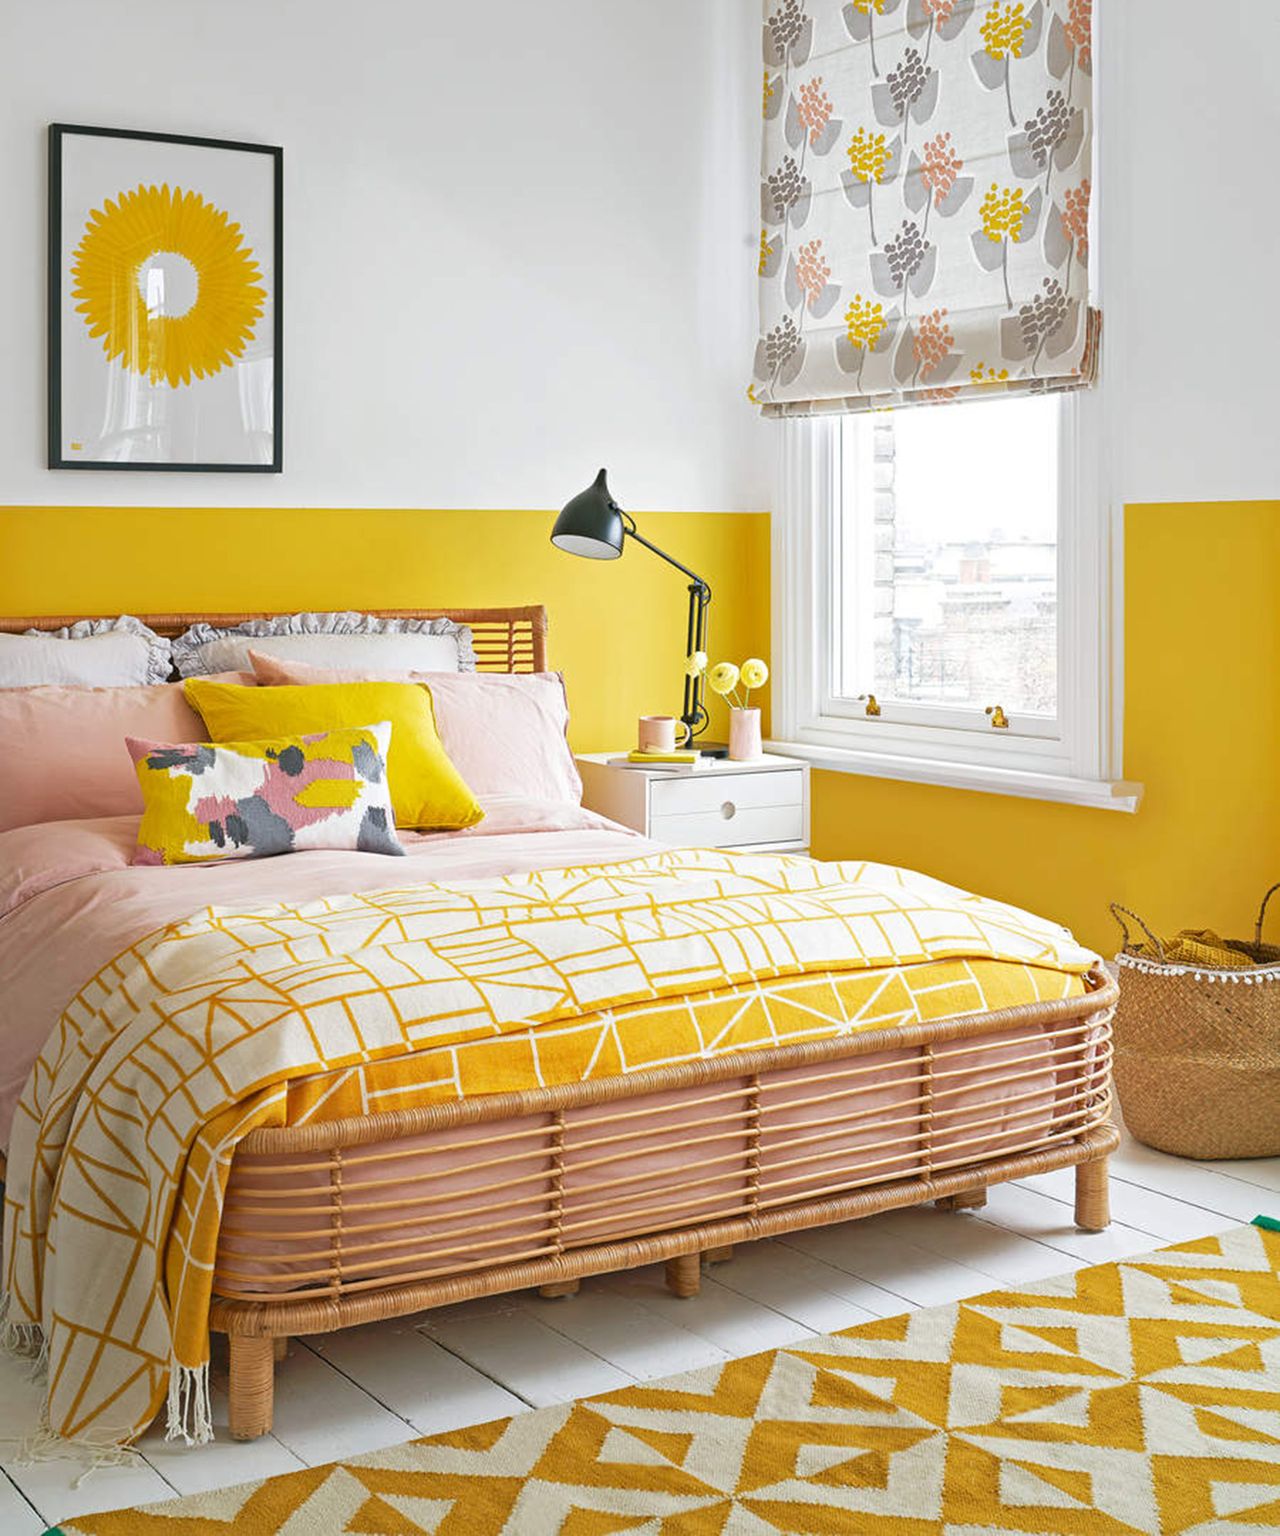 Yellow bedroom ideas: 27 ways to use the sunny color | Real Homes